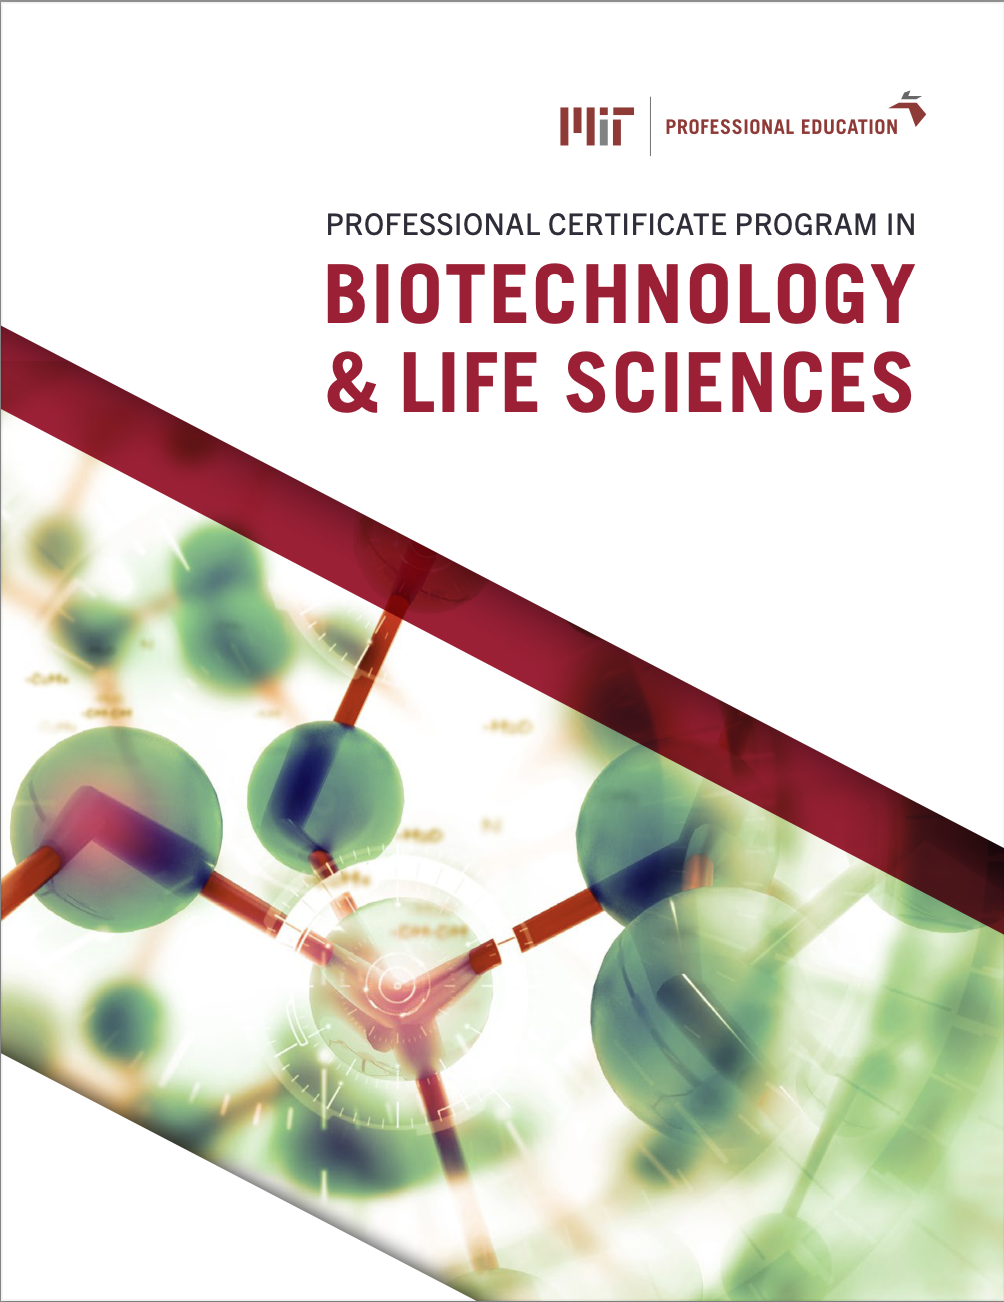 Professional Certificate Program in Biotechnology & Life Sciences